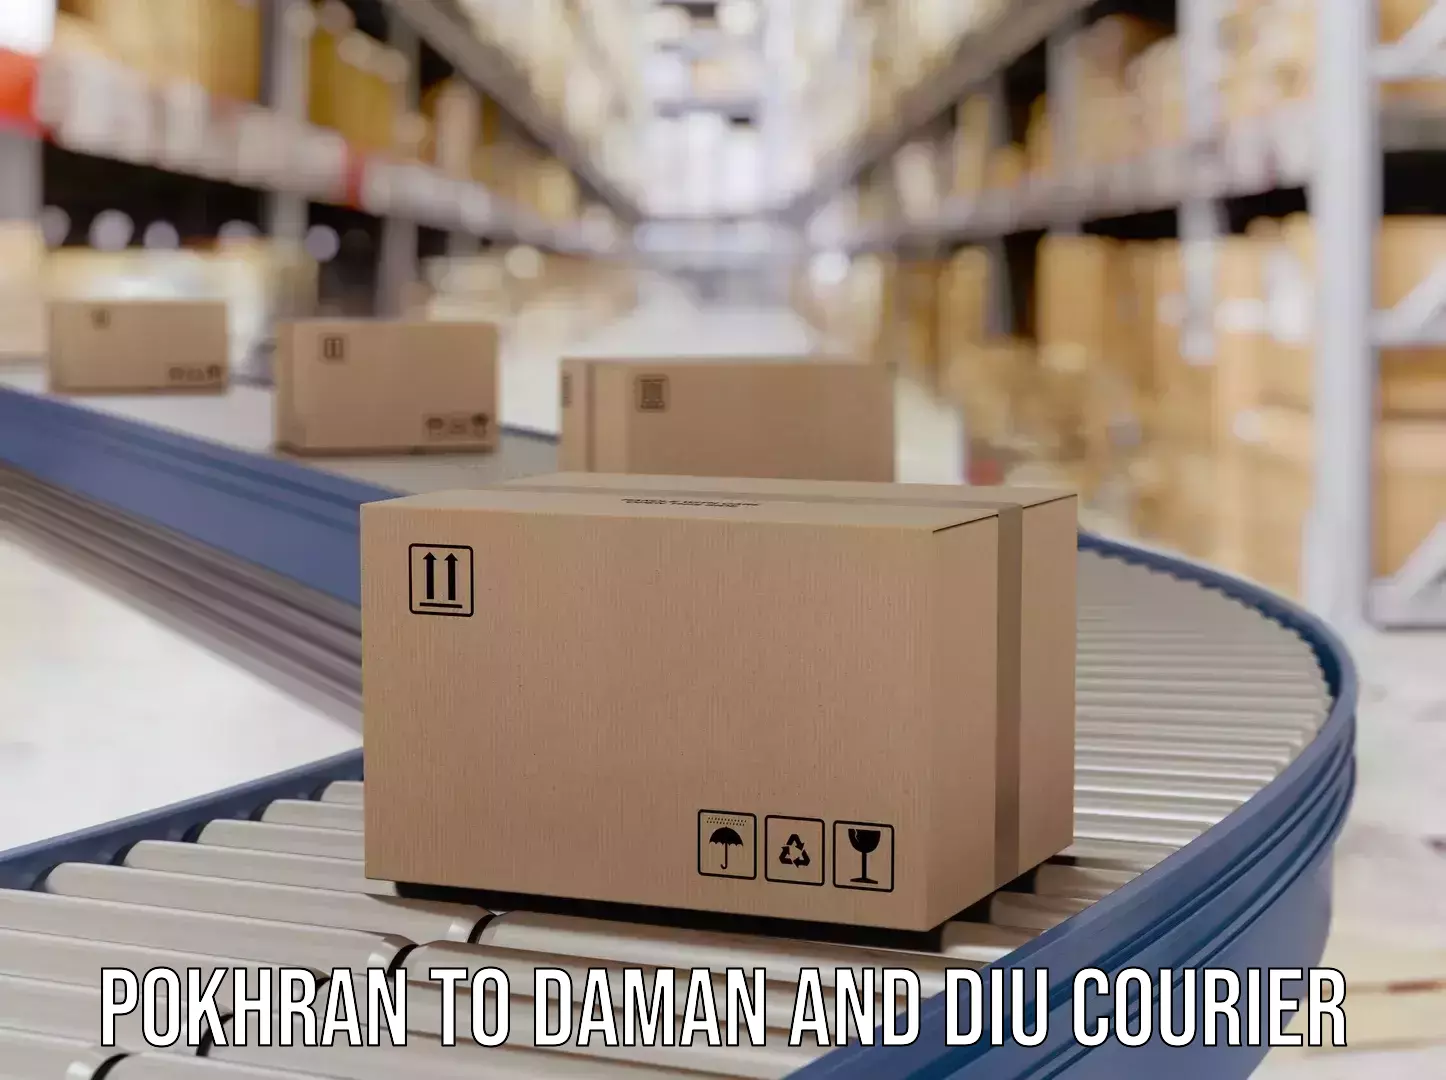 Online package tracking Pokhran to Daman and Diu